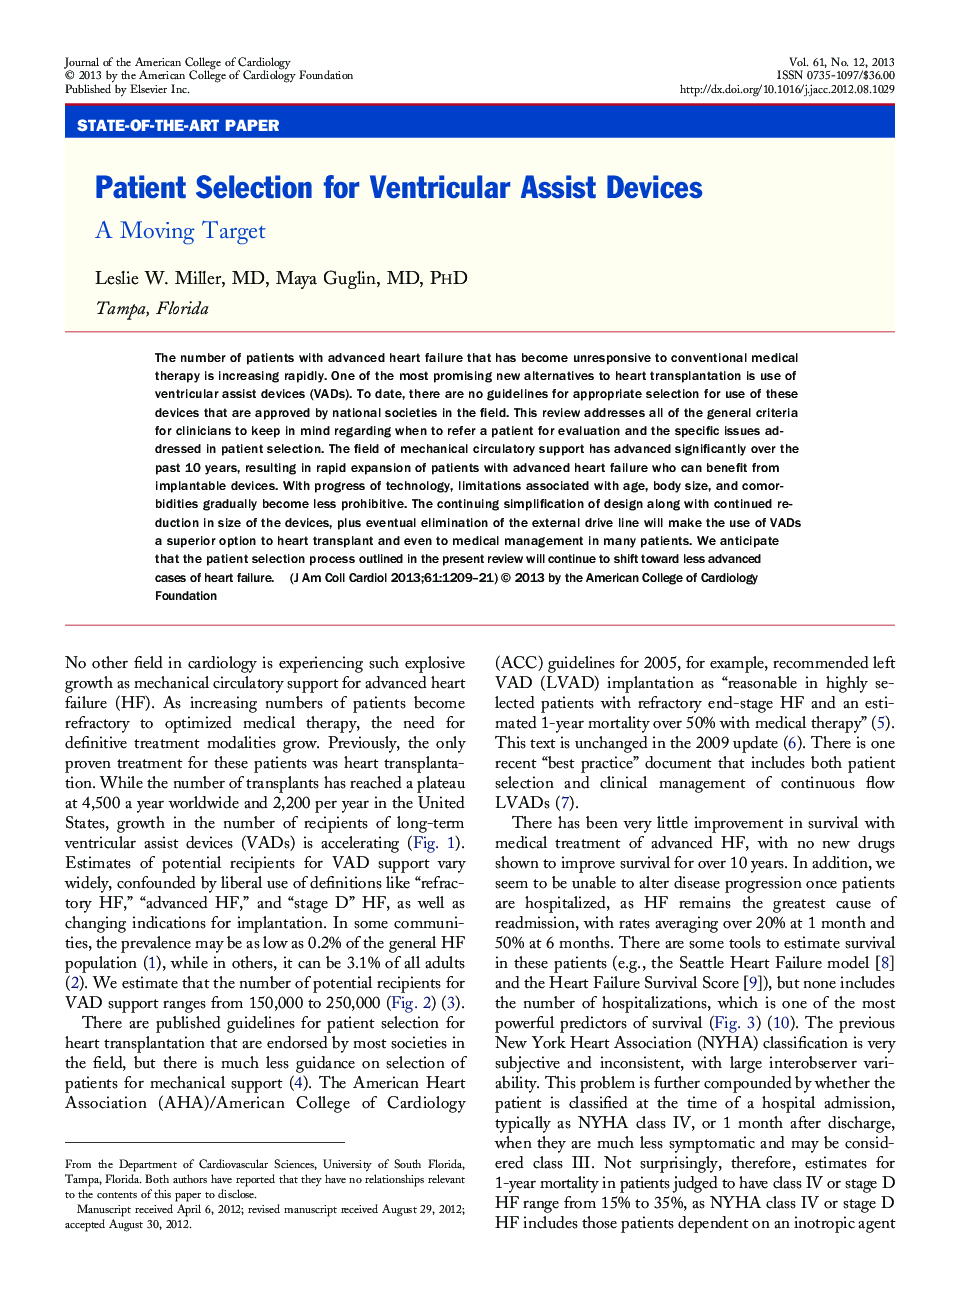 Patient Selection for Ventricular Assist Devices : A Moving Target